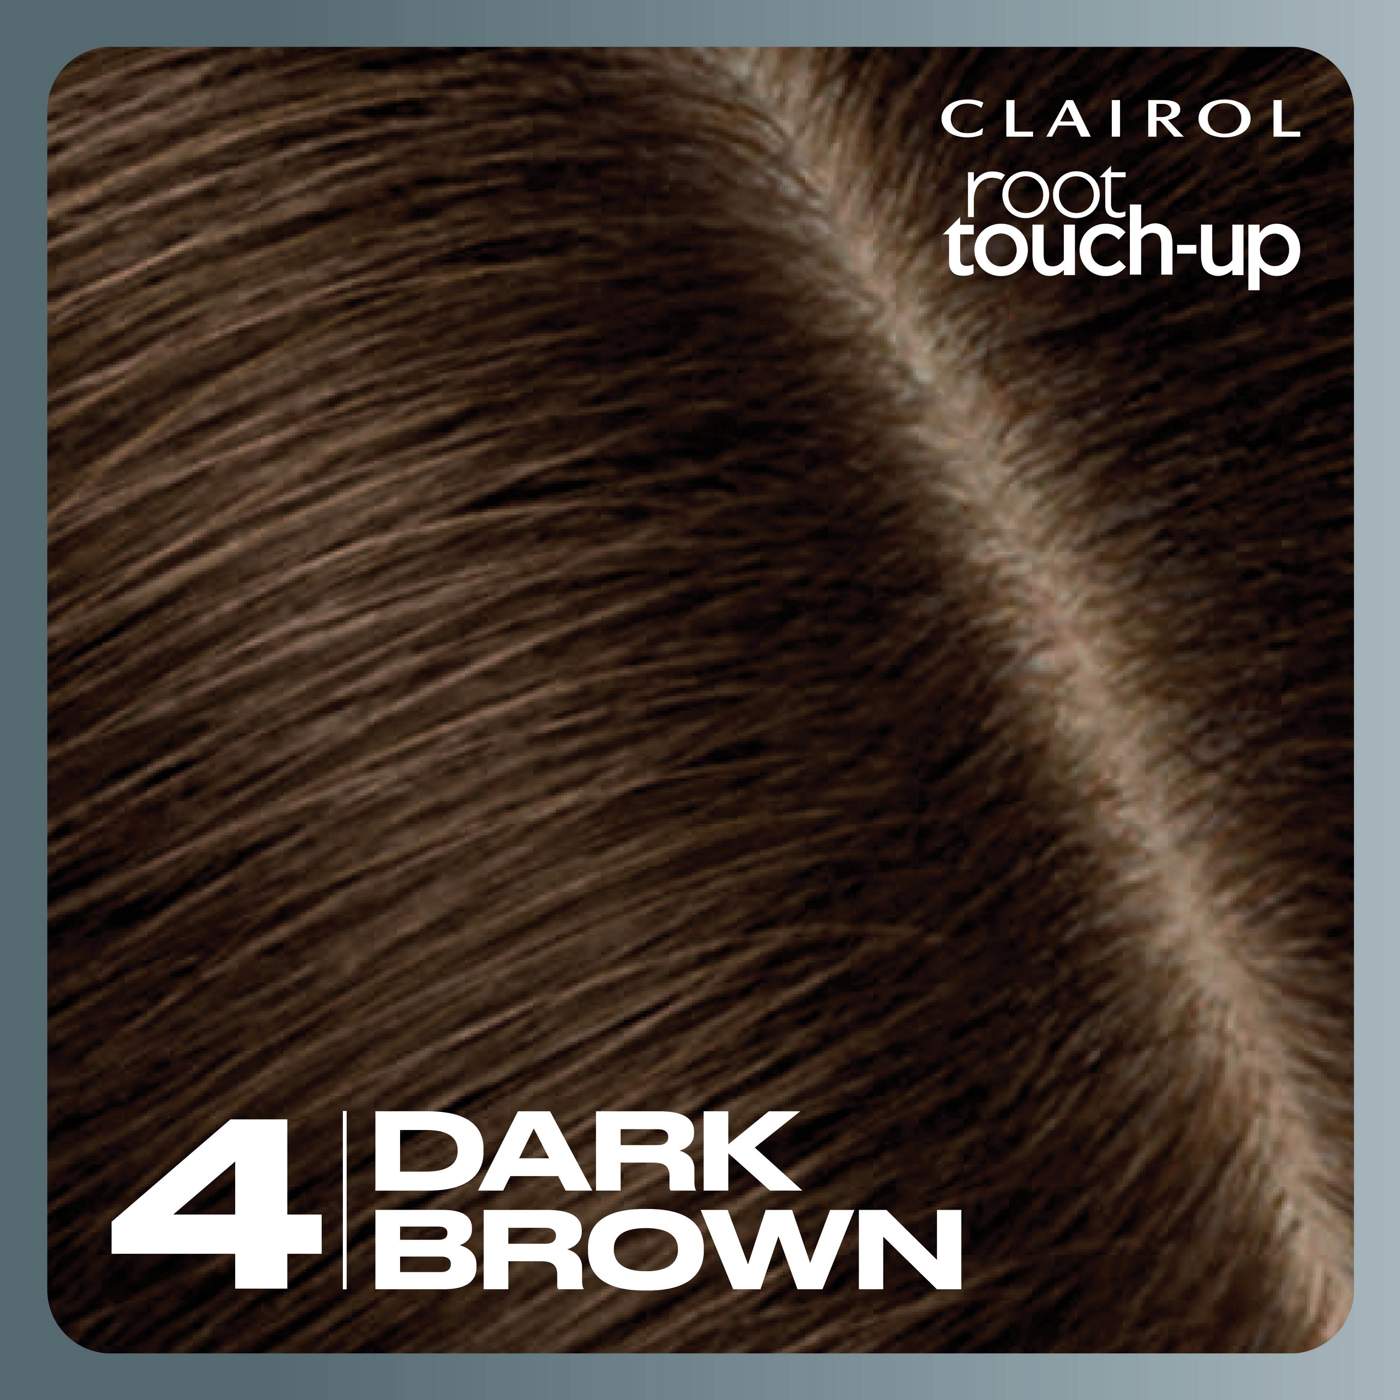 Clairol Nice 'n Easy Permanent Root Touch-Up - 4 Dark Brown; image 10 of 10